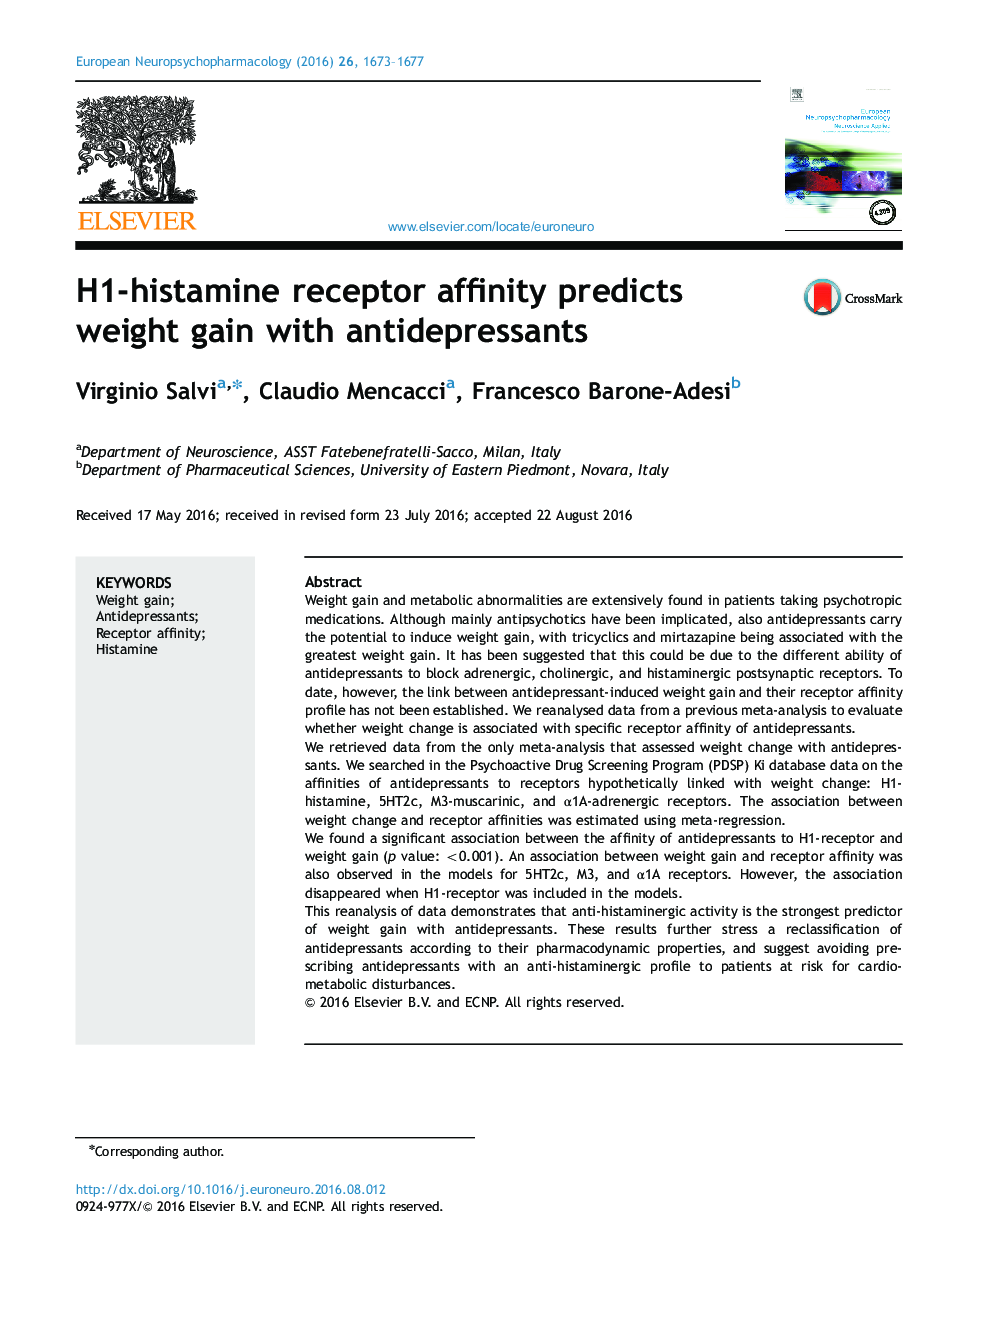 H1-histamine receptor affinity predicts weight gain with antidepressants